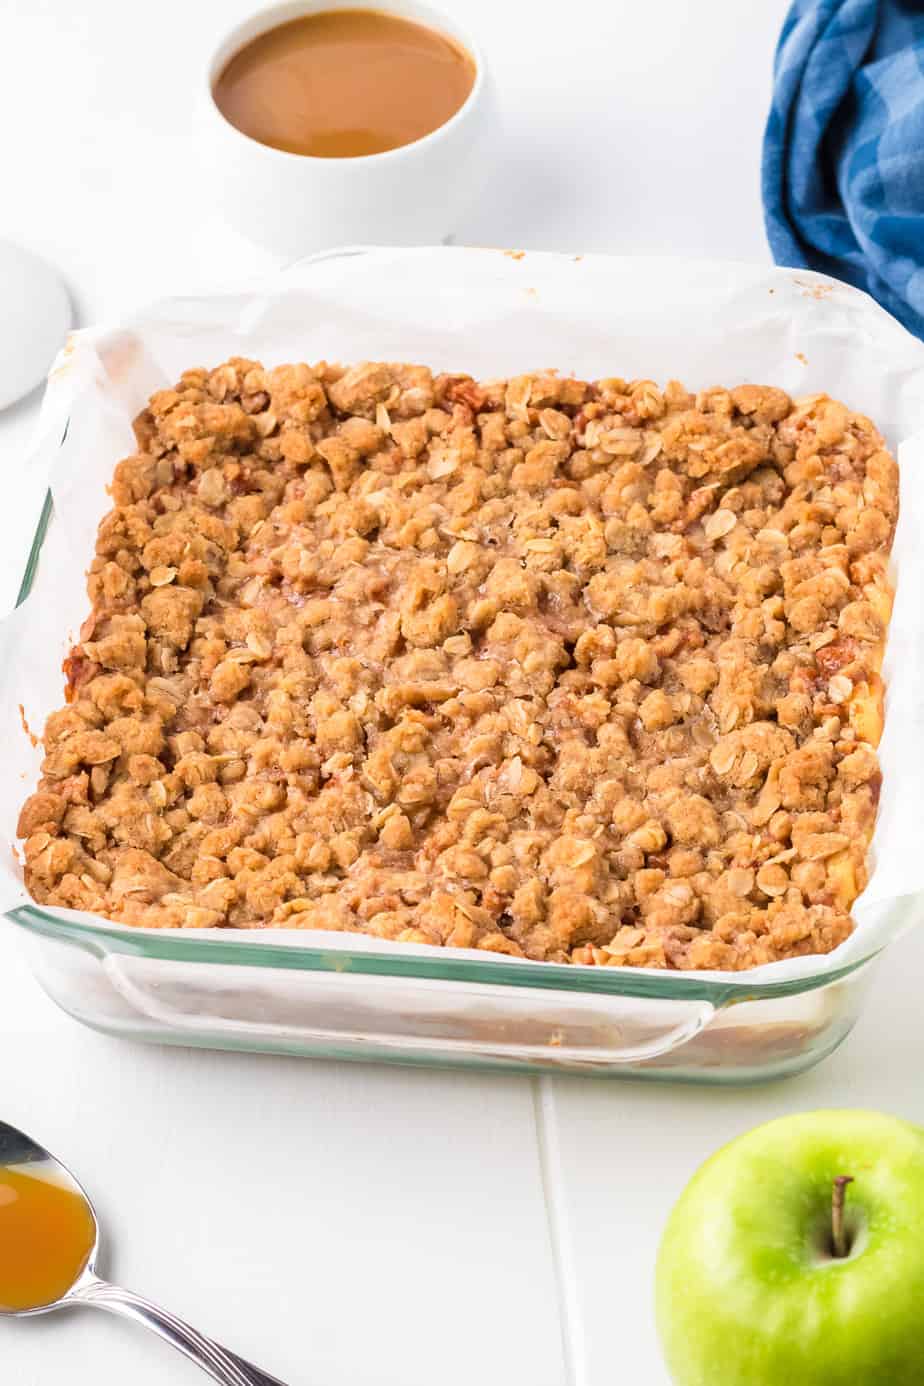 Apple crumb cheesecake bars after baking in a square pan from the side with an apple and caramel also on the table.